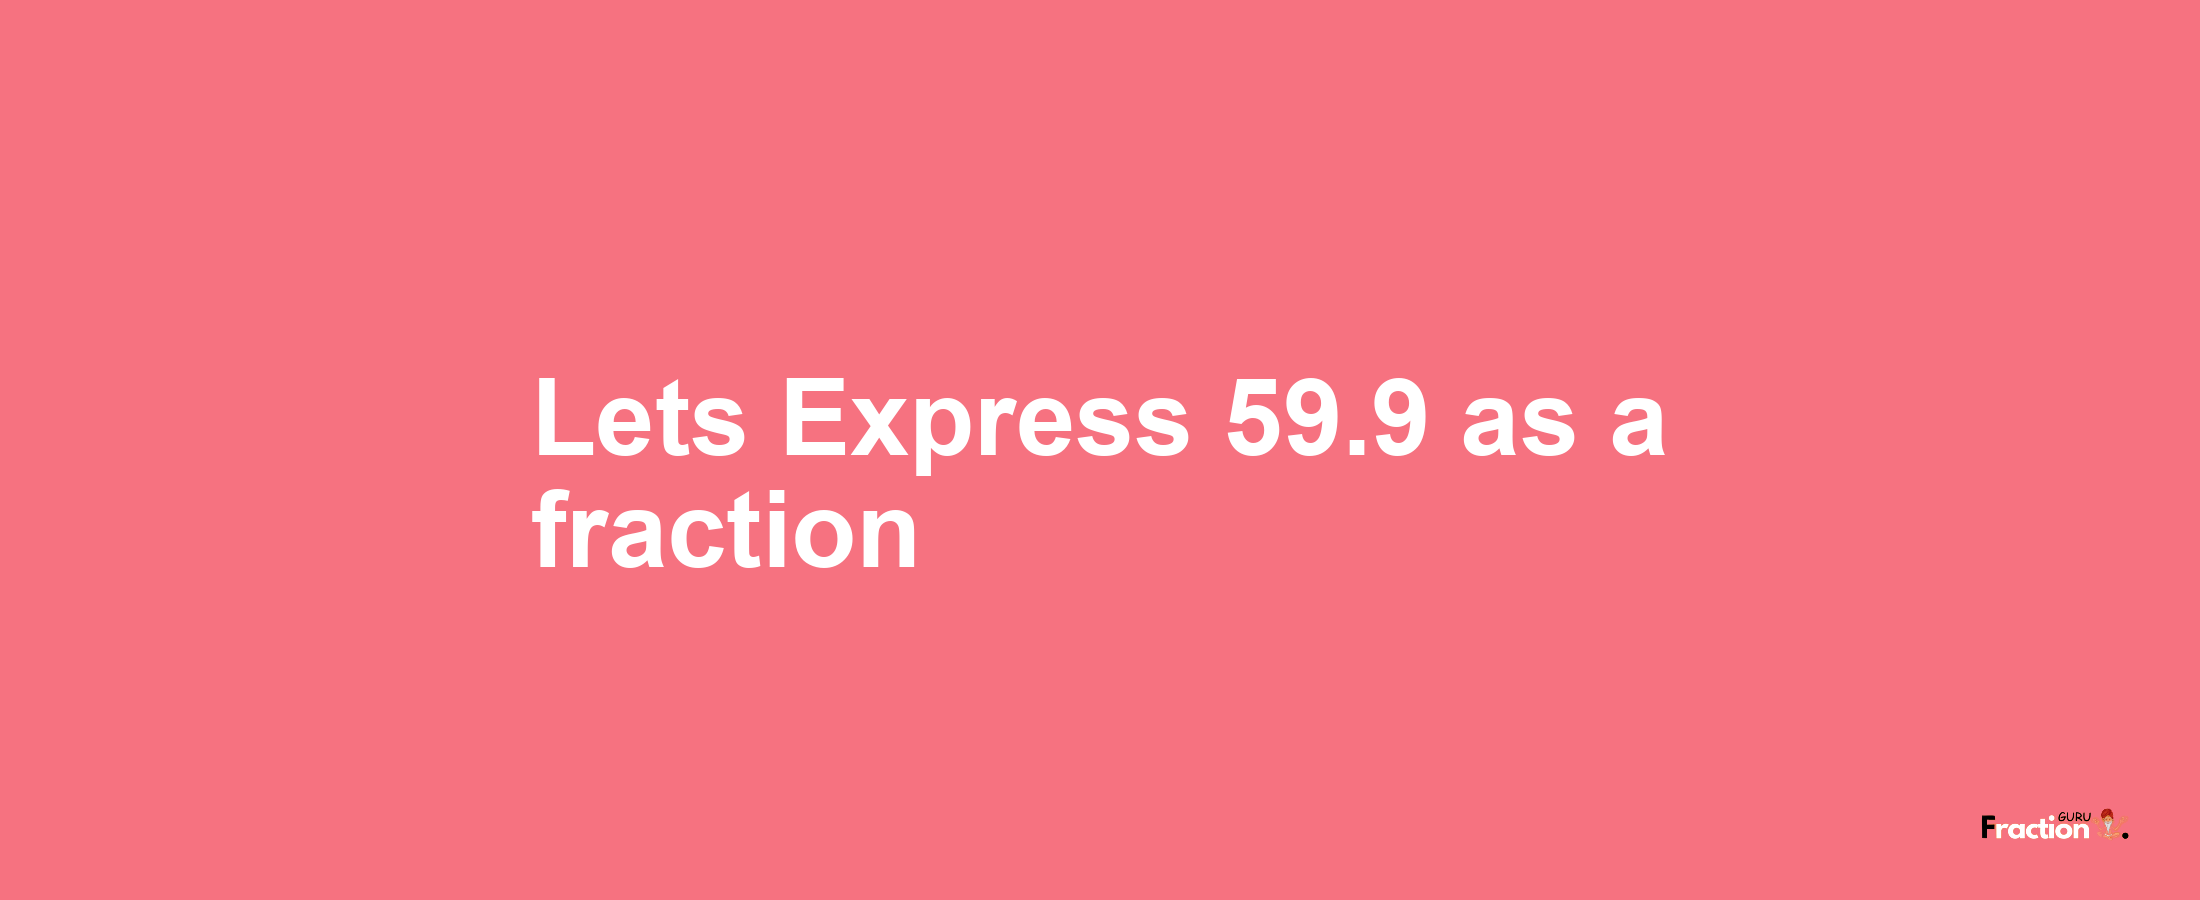 Lets Express 59.9 as afraction